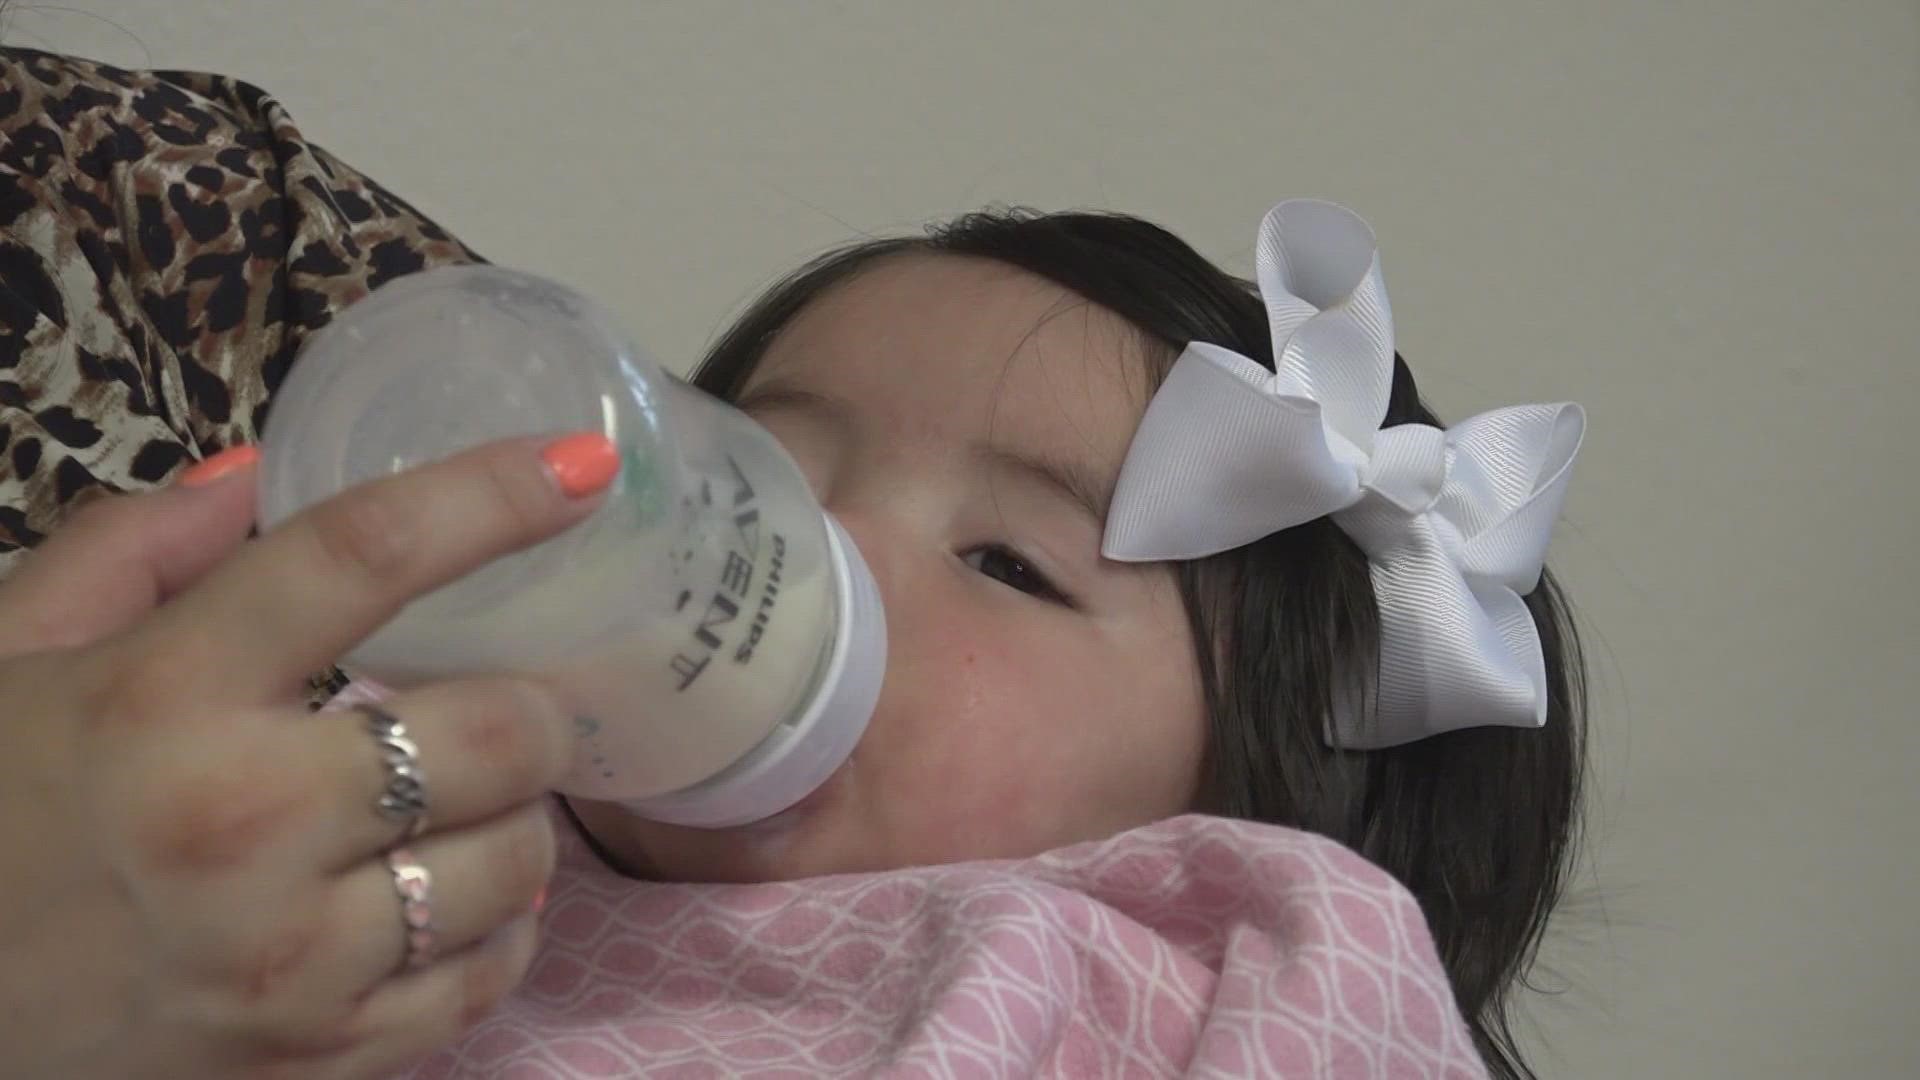 "Having to go look for milk every day, one can at a time, is very hard for us," one mom says.